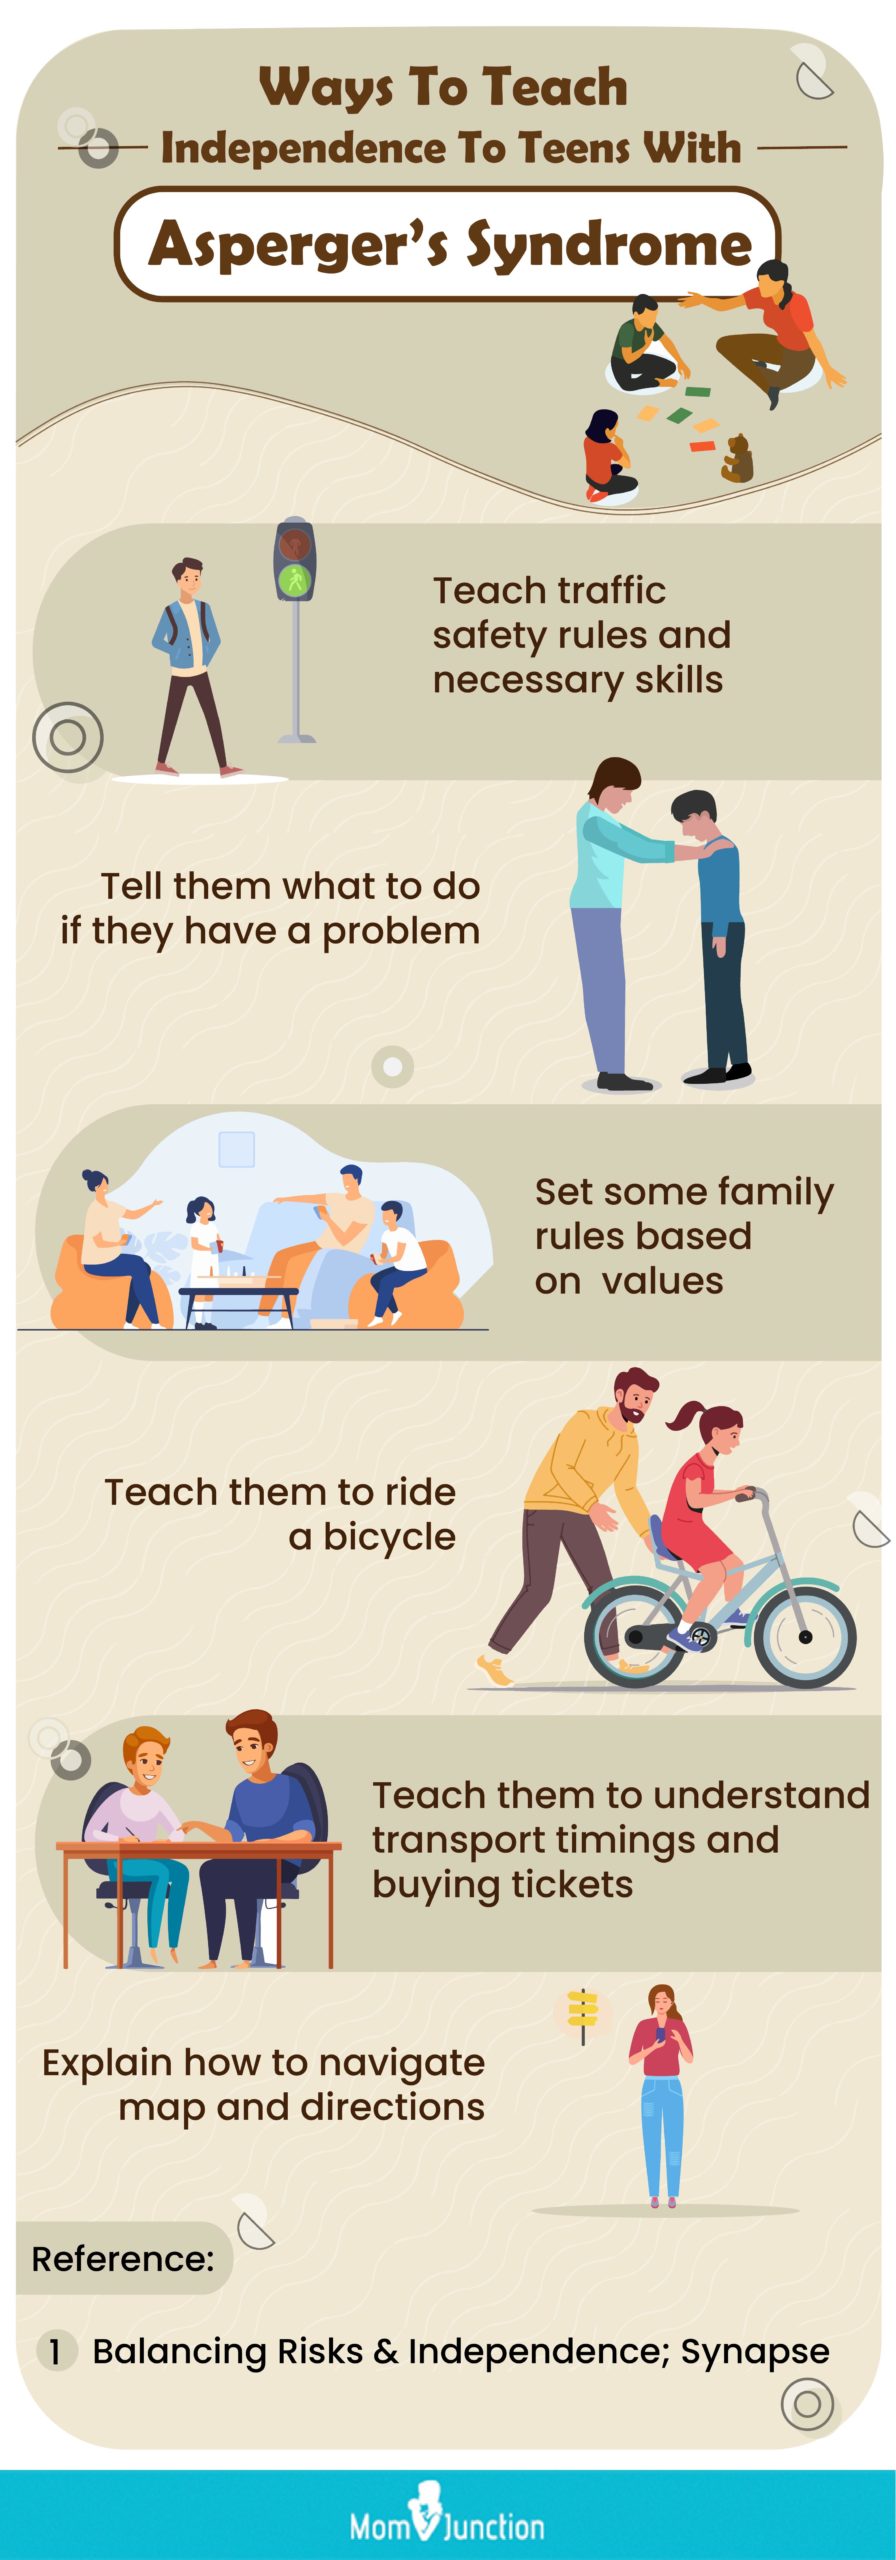 ways to teach independence to teens with asperger’s syndrome (infographic)